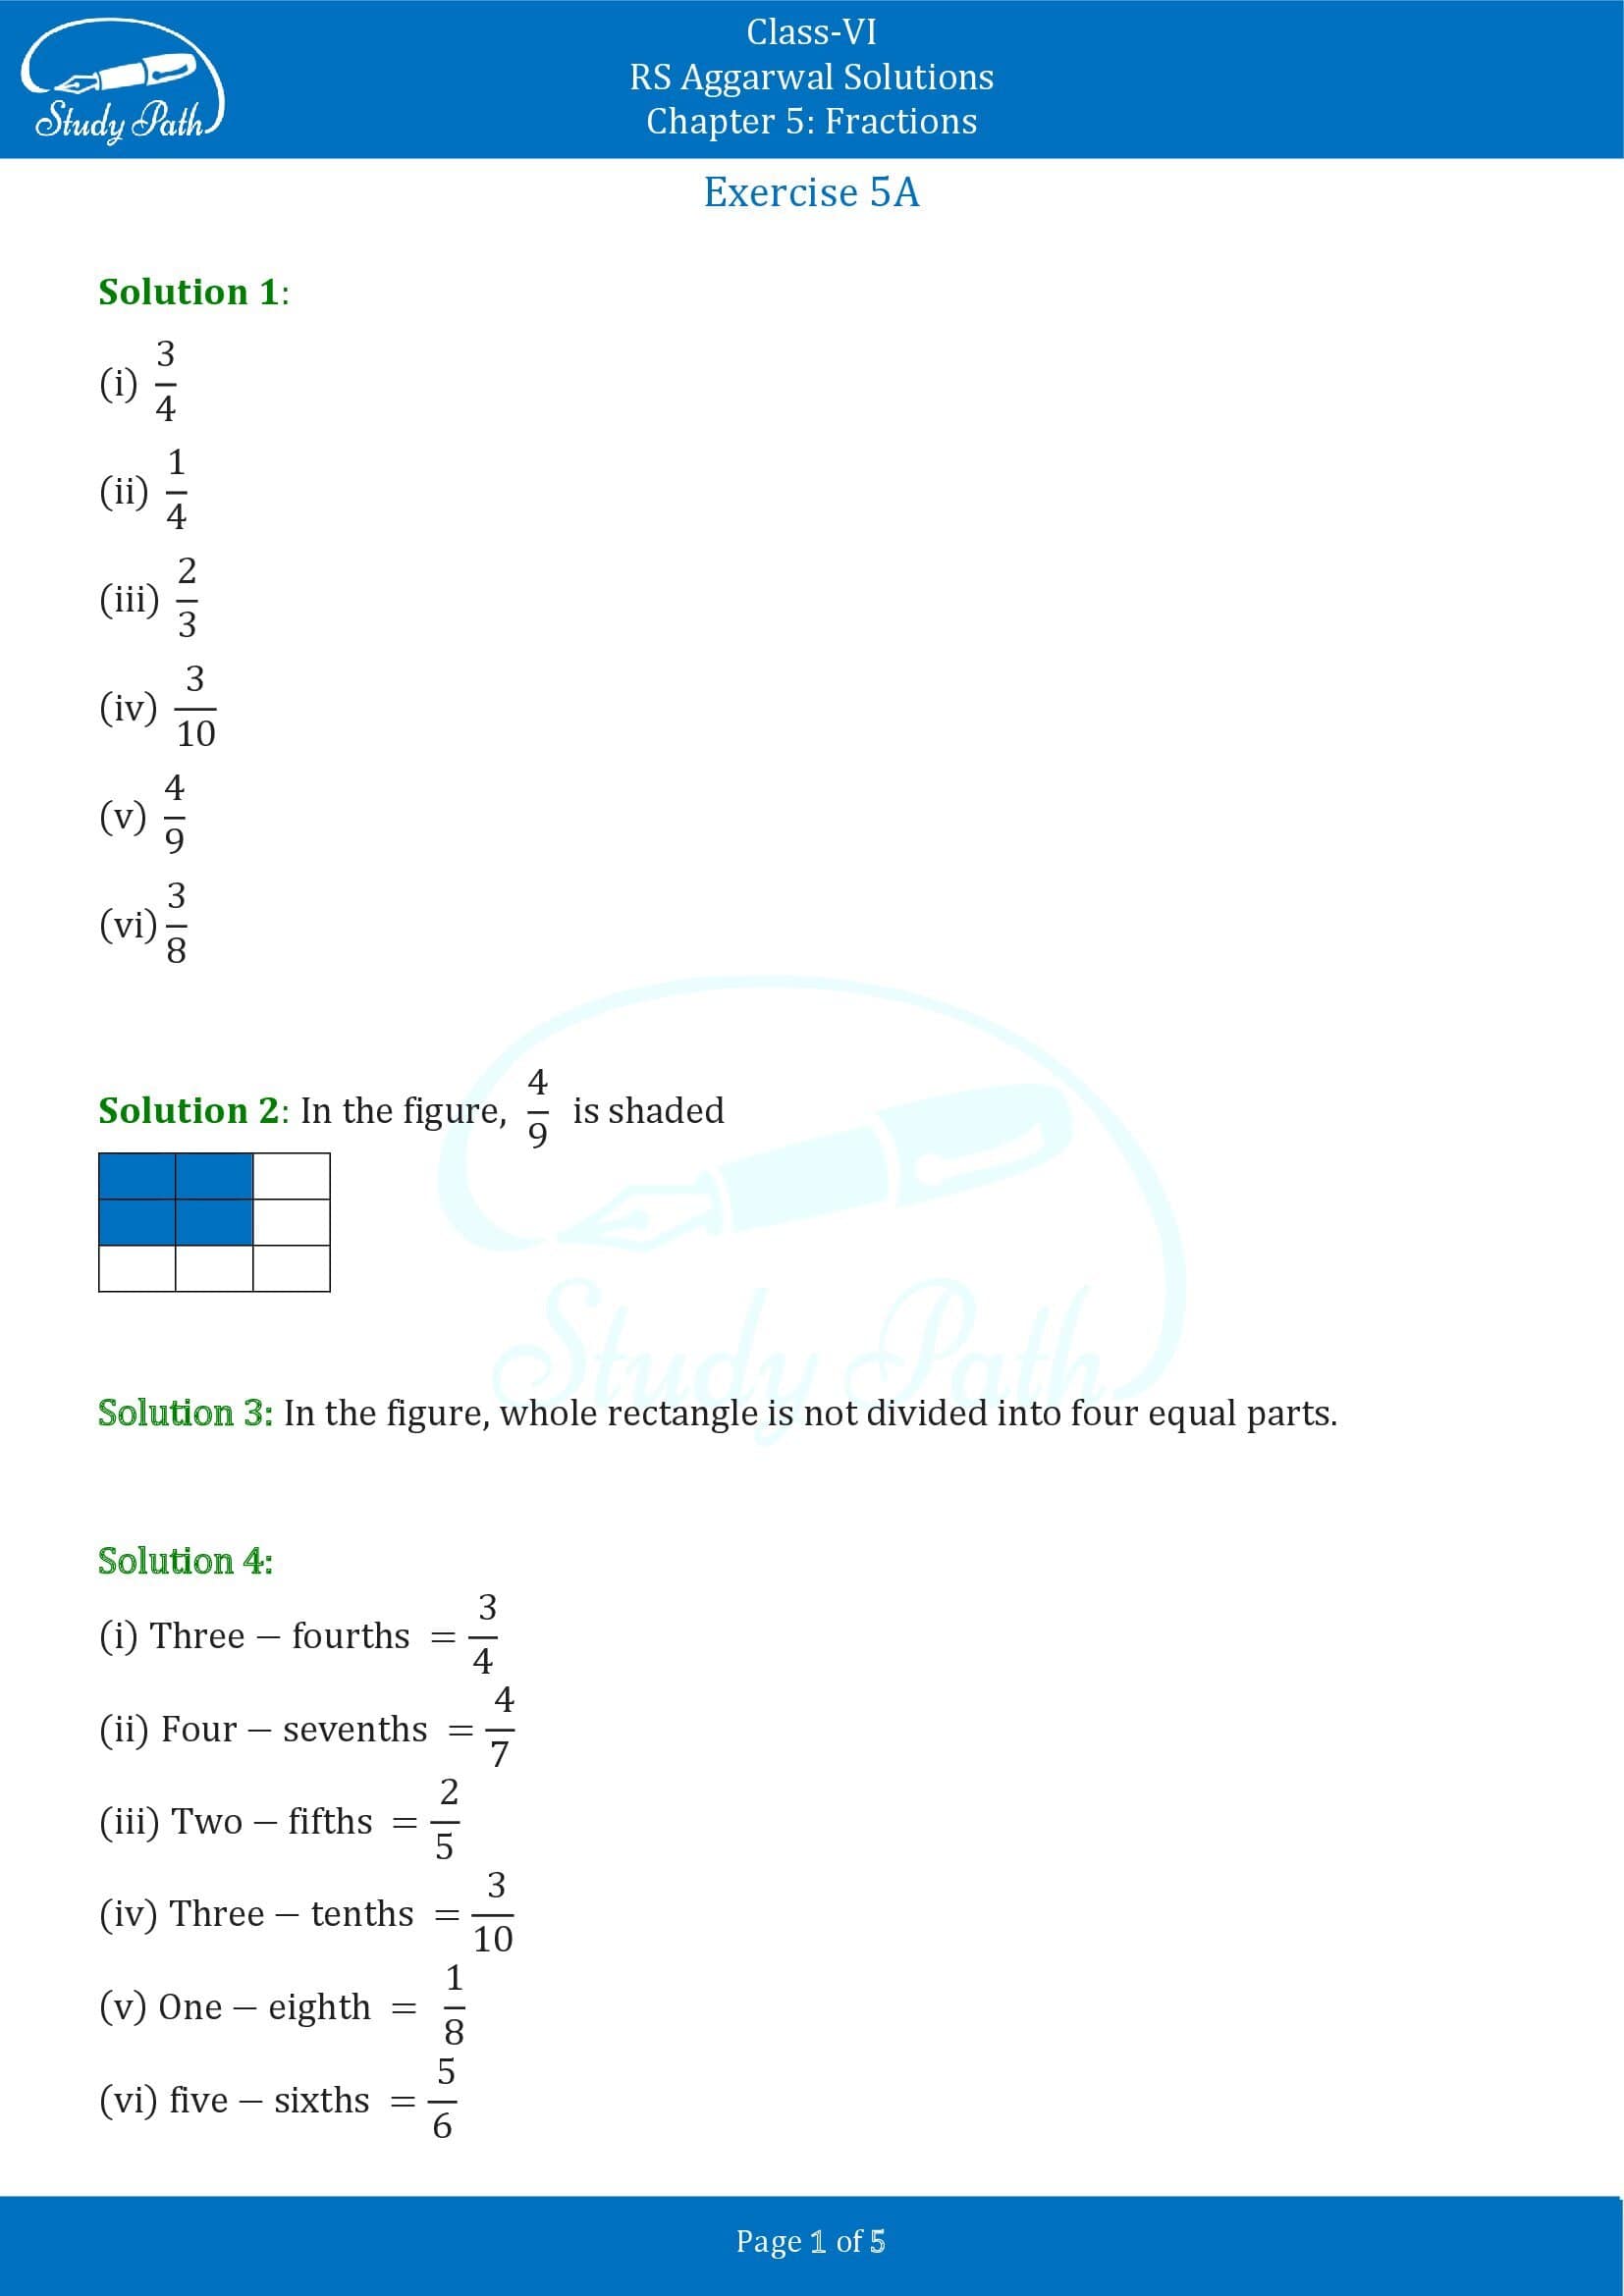 RS Aggarwal Solutions Class 6 Chapter 5 Fractions Exercise 5A 0001